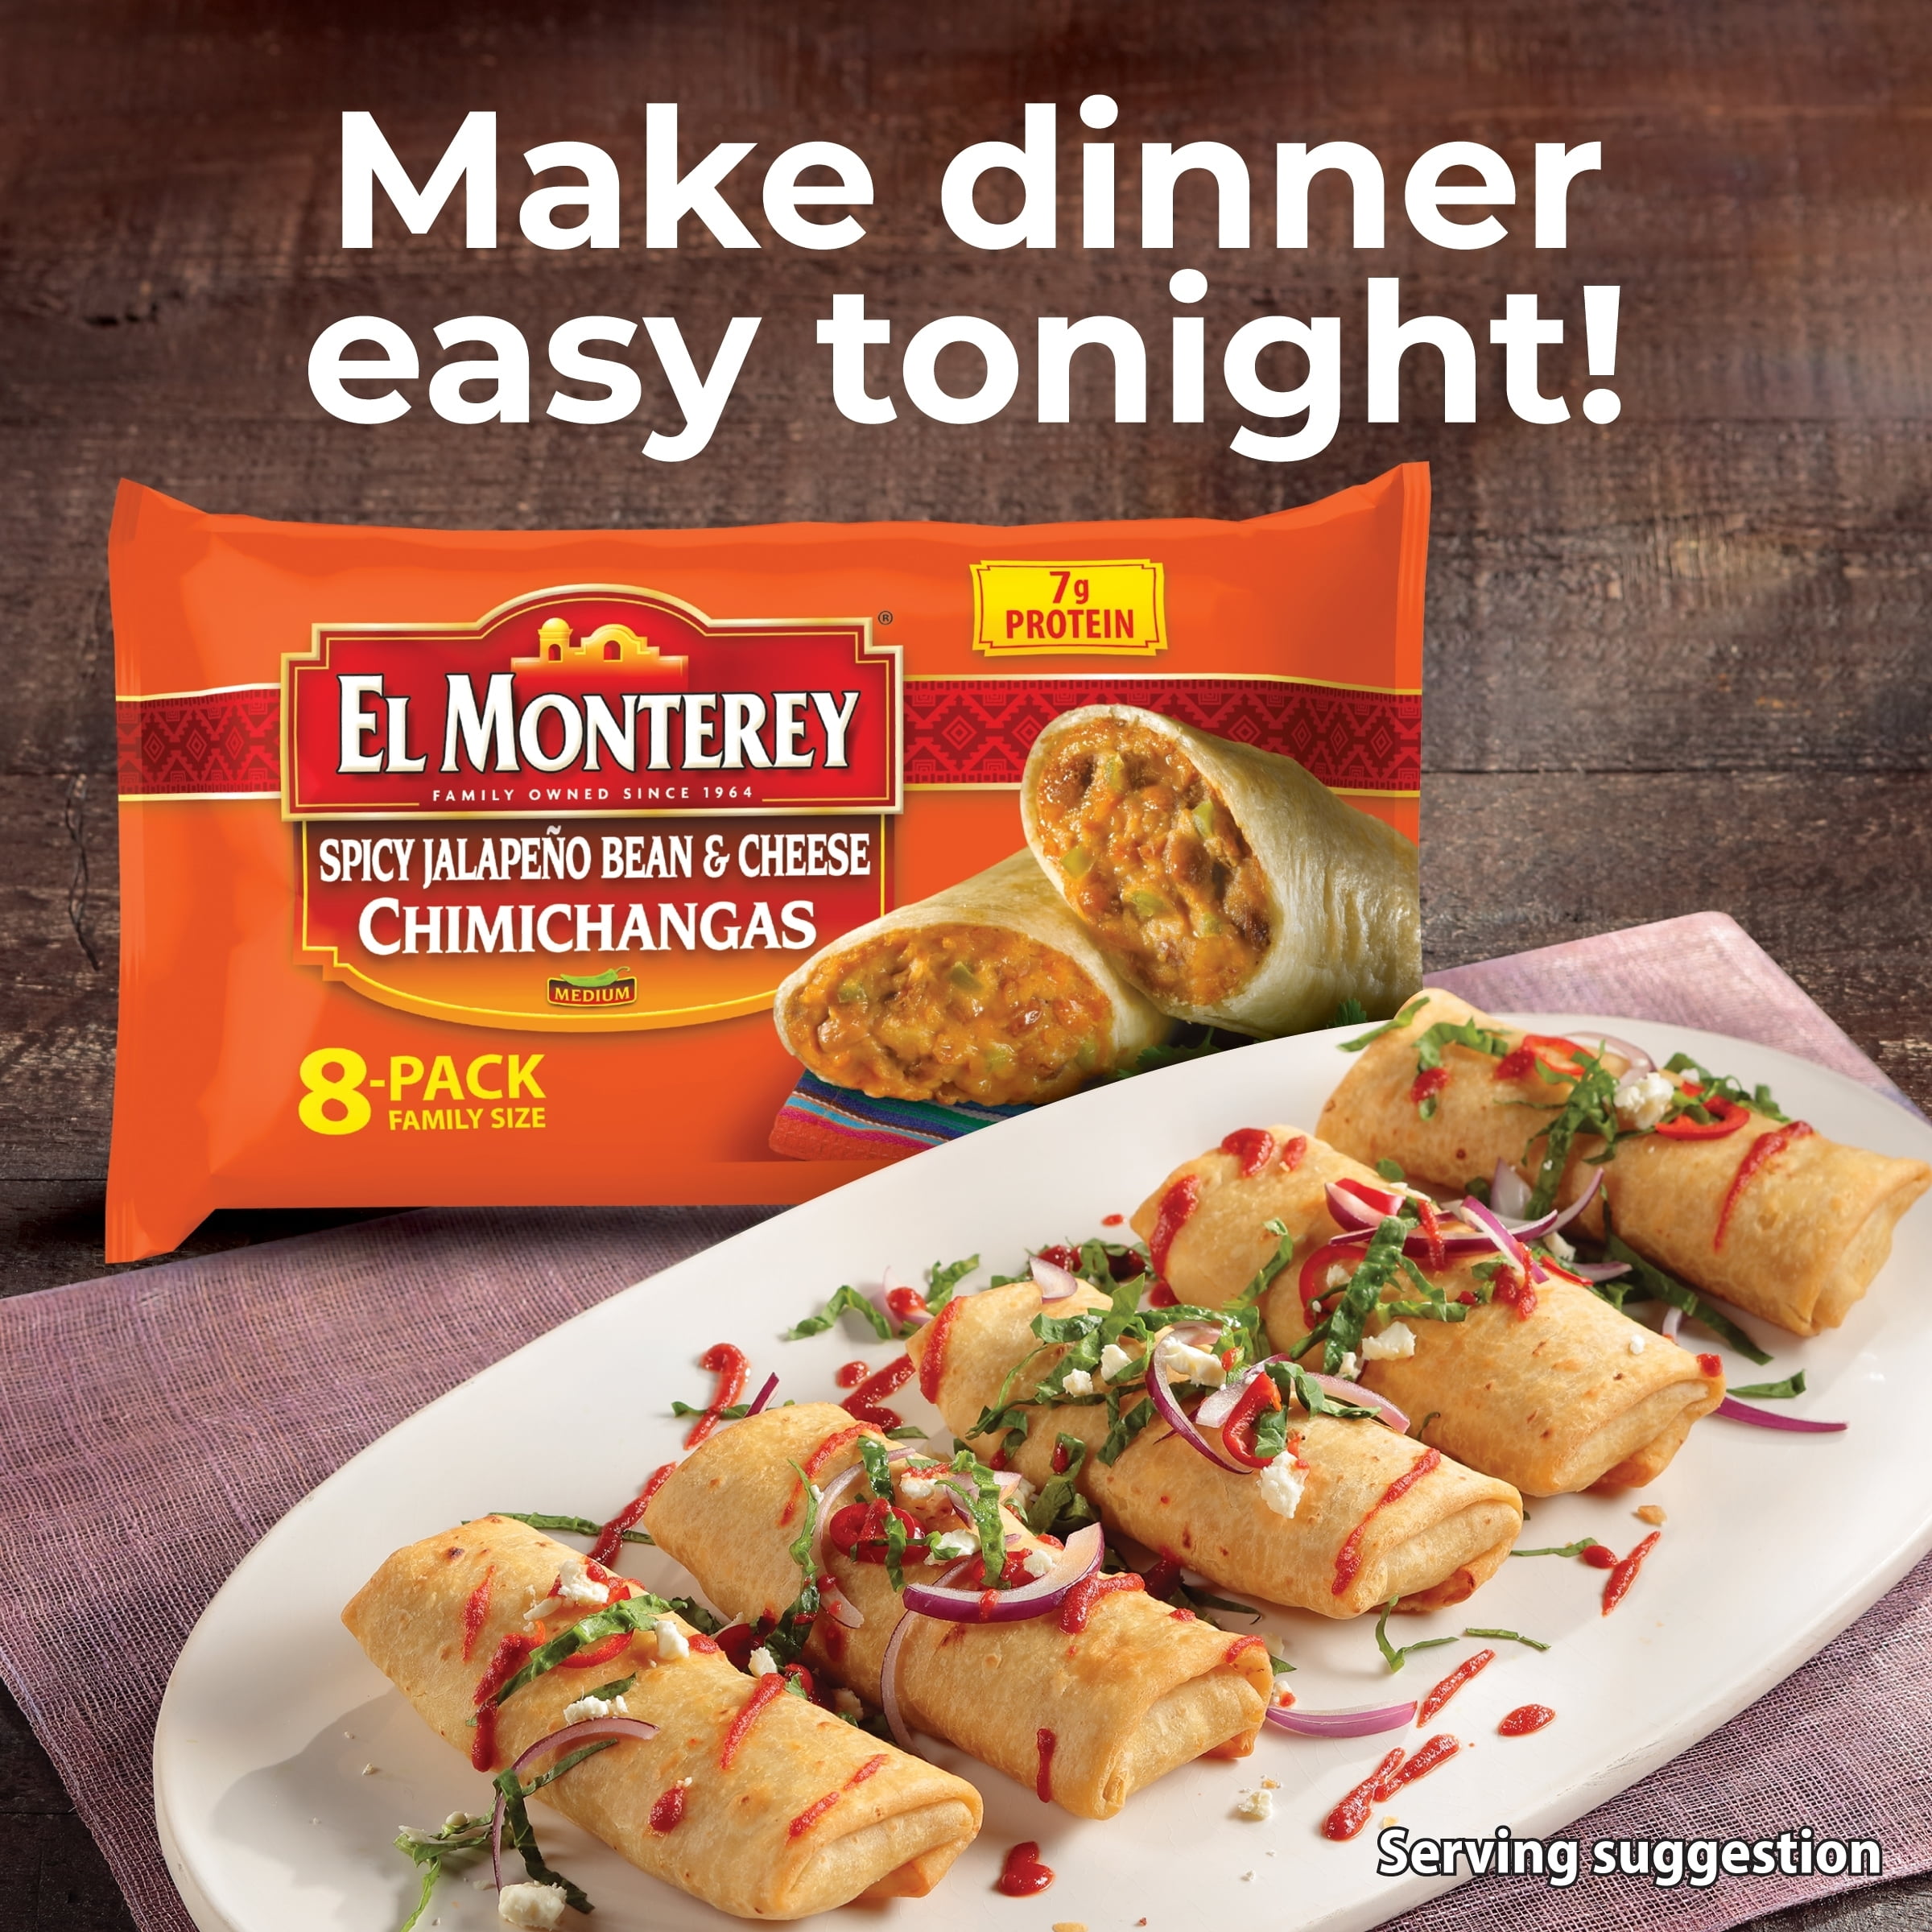 El Monterey® XXLarge! Spicy Red Hot Bean & Cheese Chimichanga, 8 oz - Fry's  Food Stores